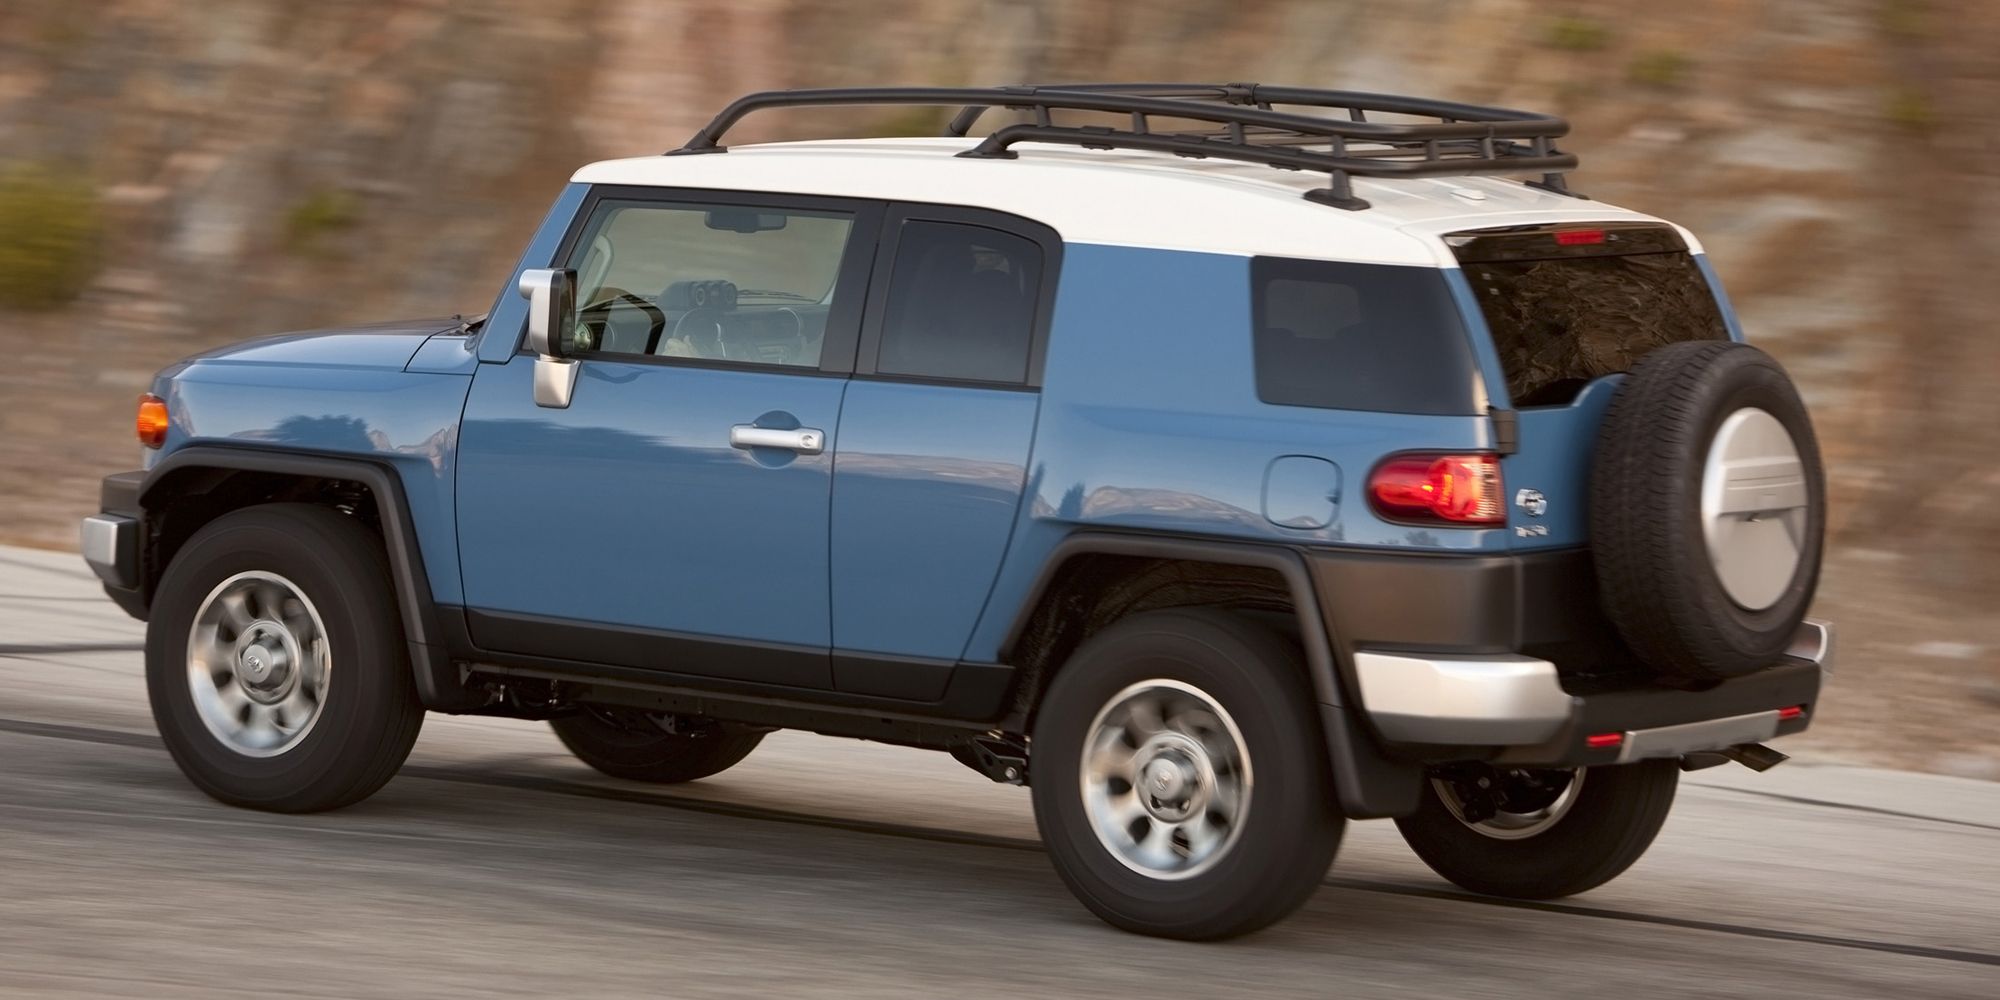 Rear 3/4 view of the Toyota FJ Cruiser